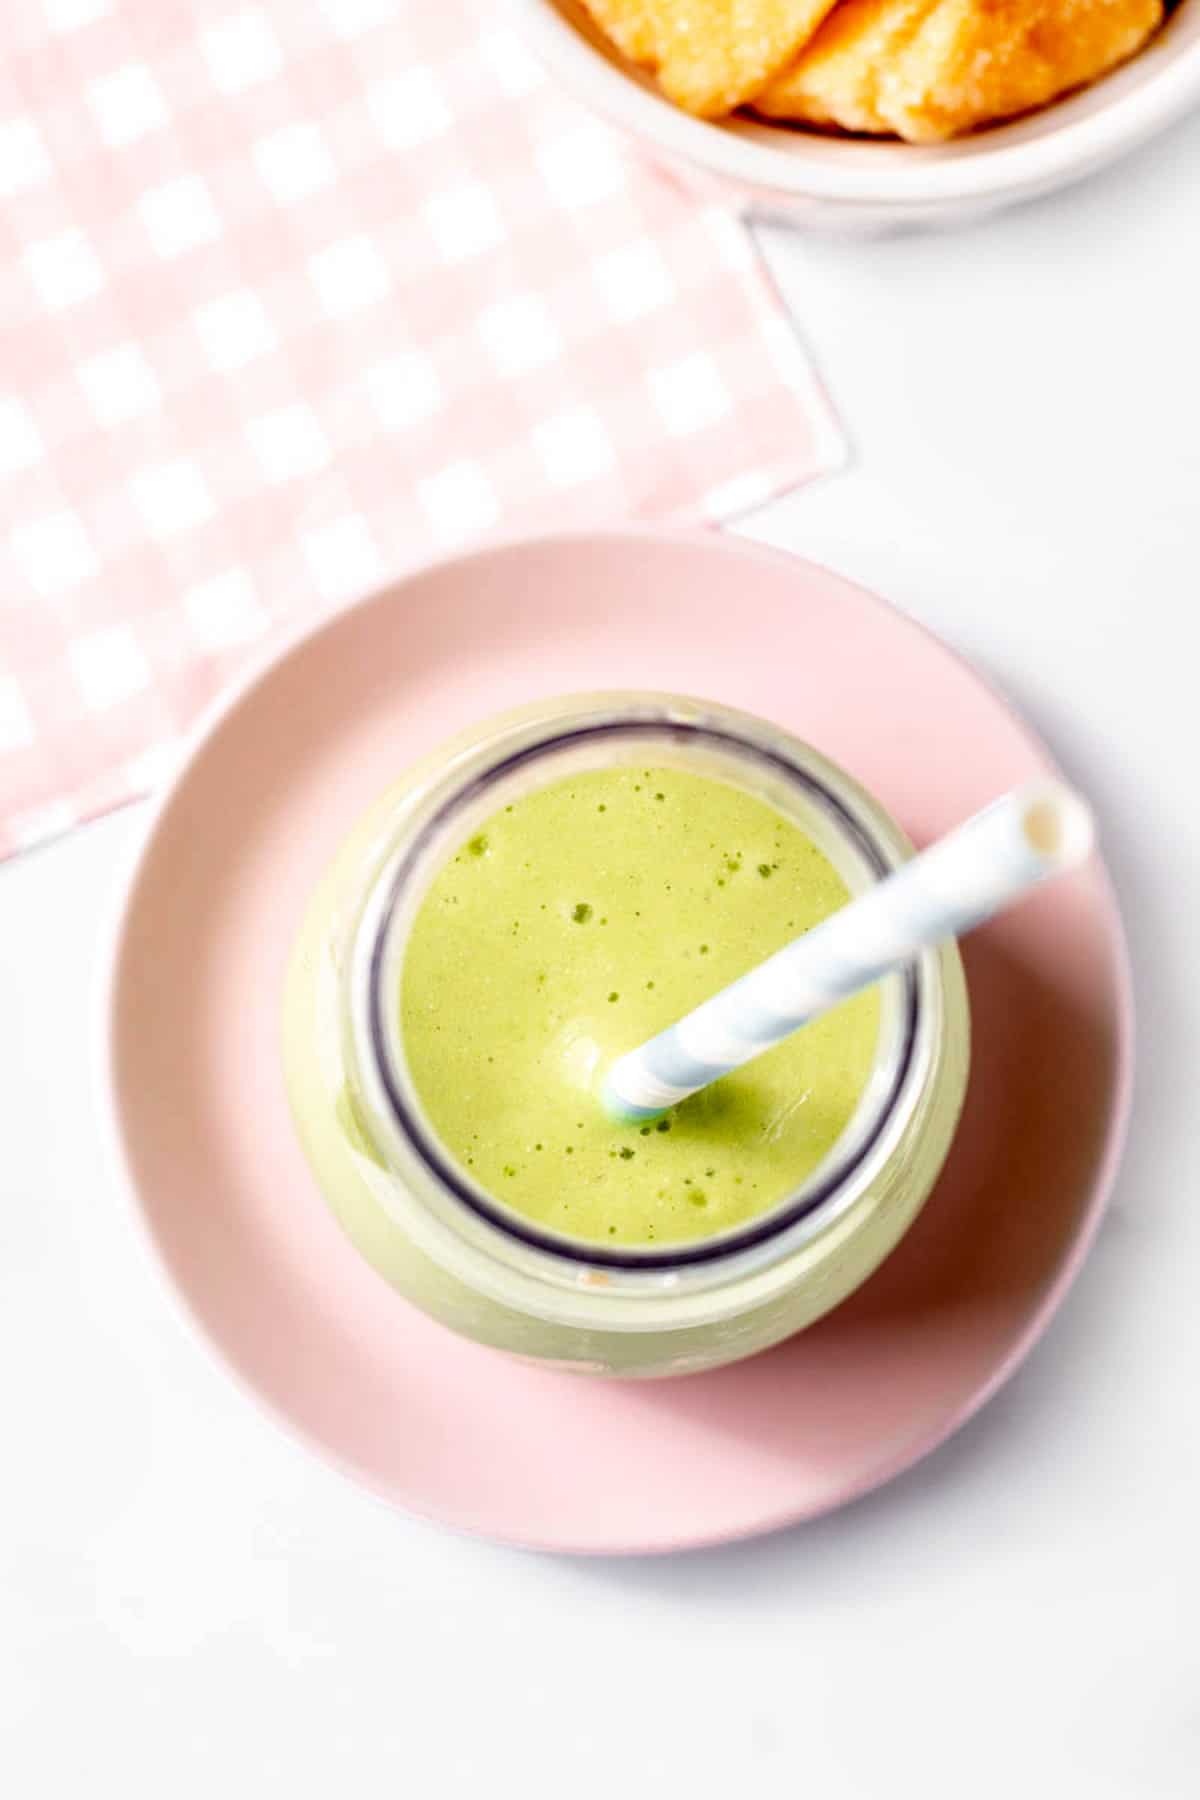 Overhead shot of a creamy green smoothie in a milk bottle with a straw.